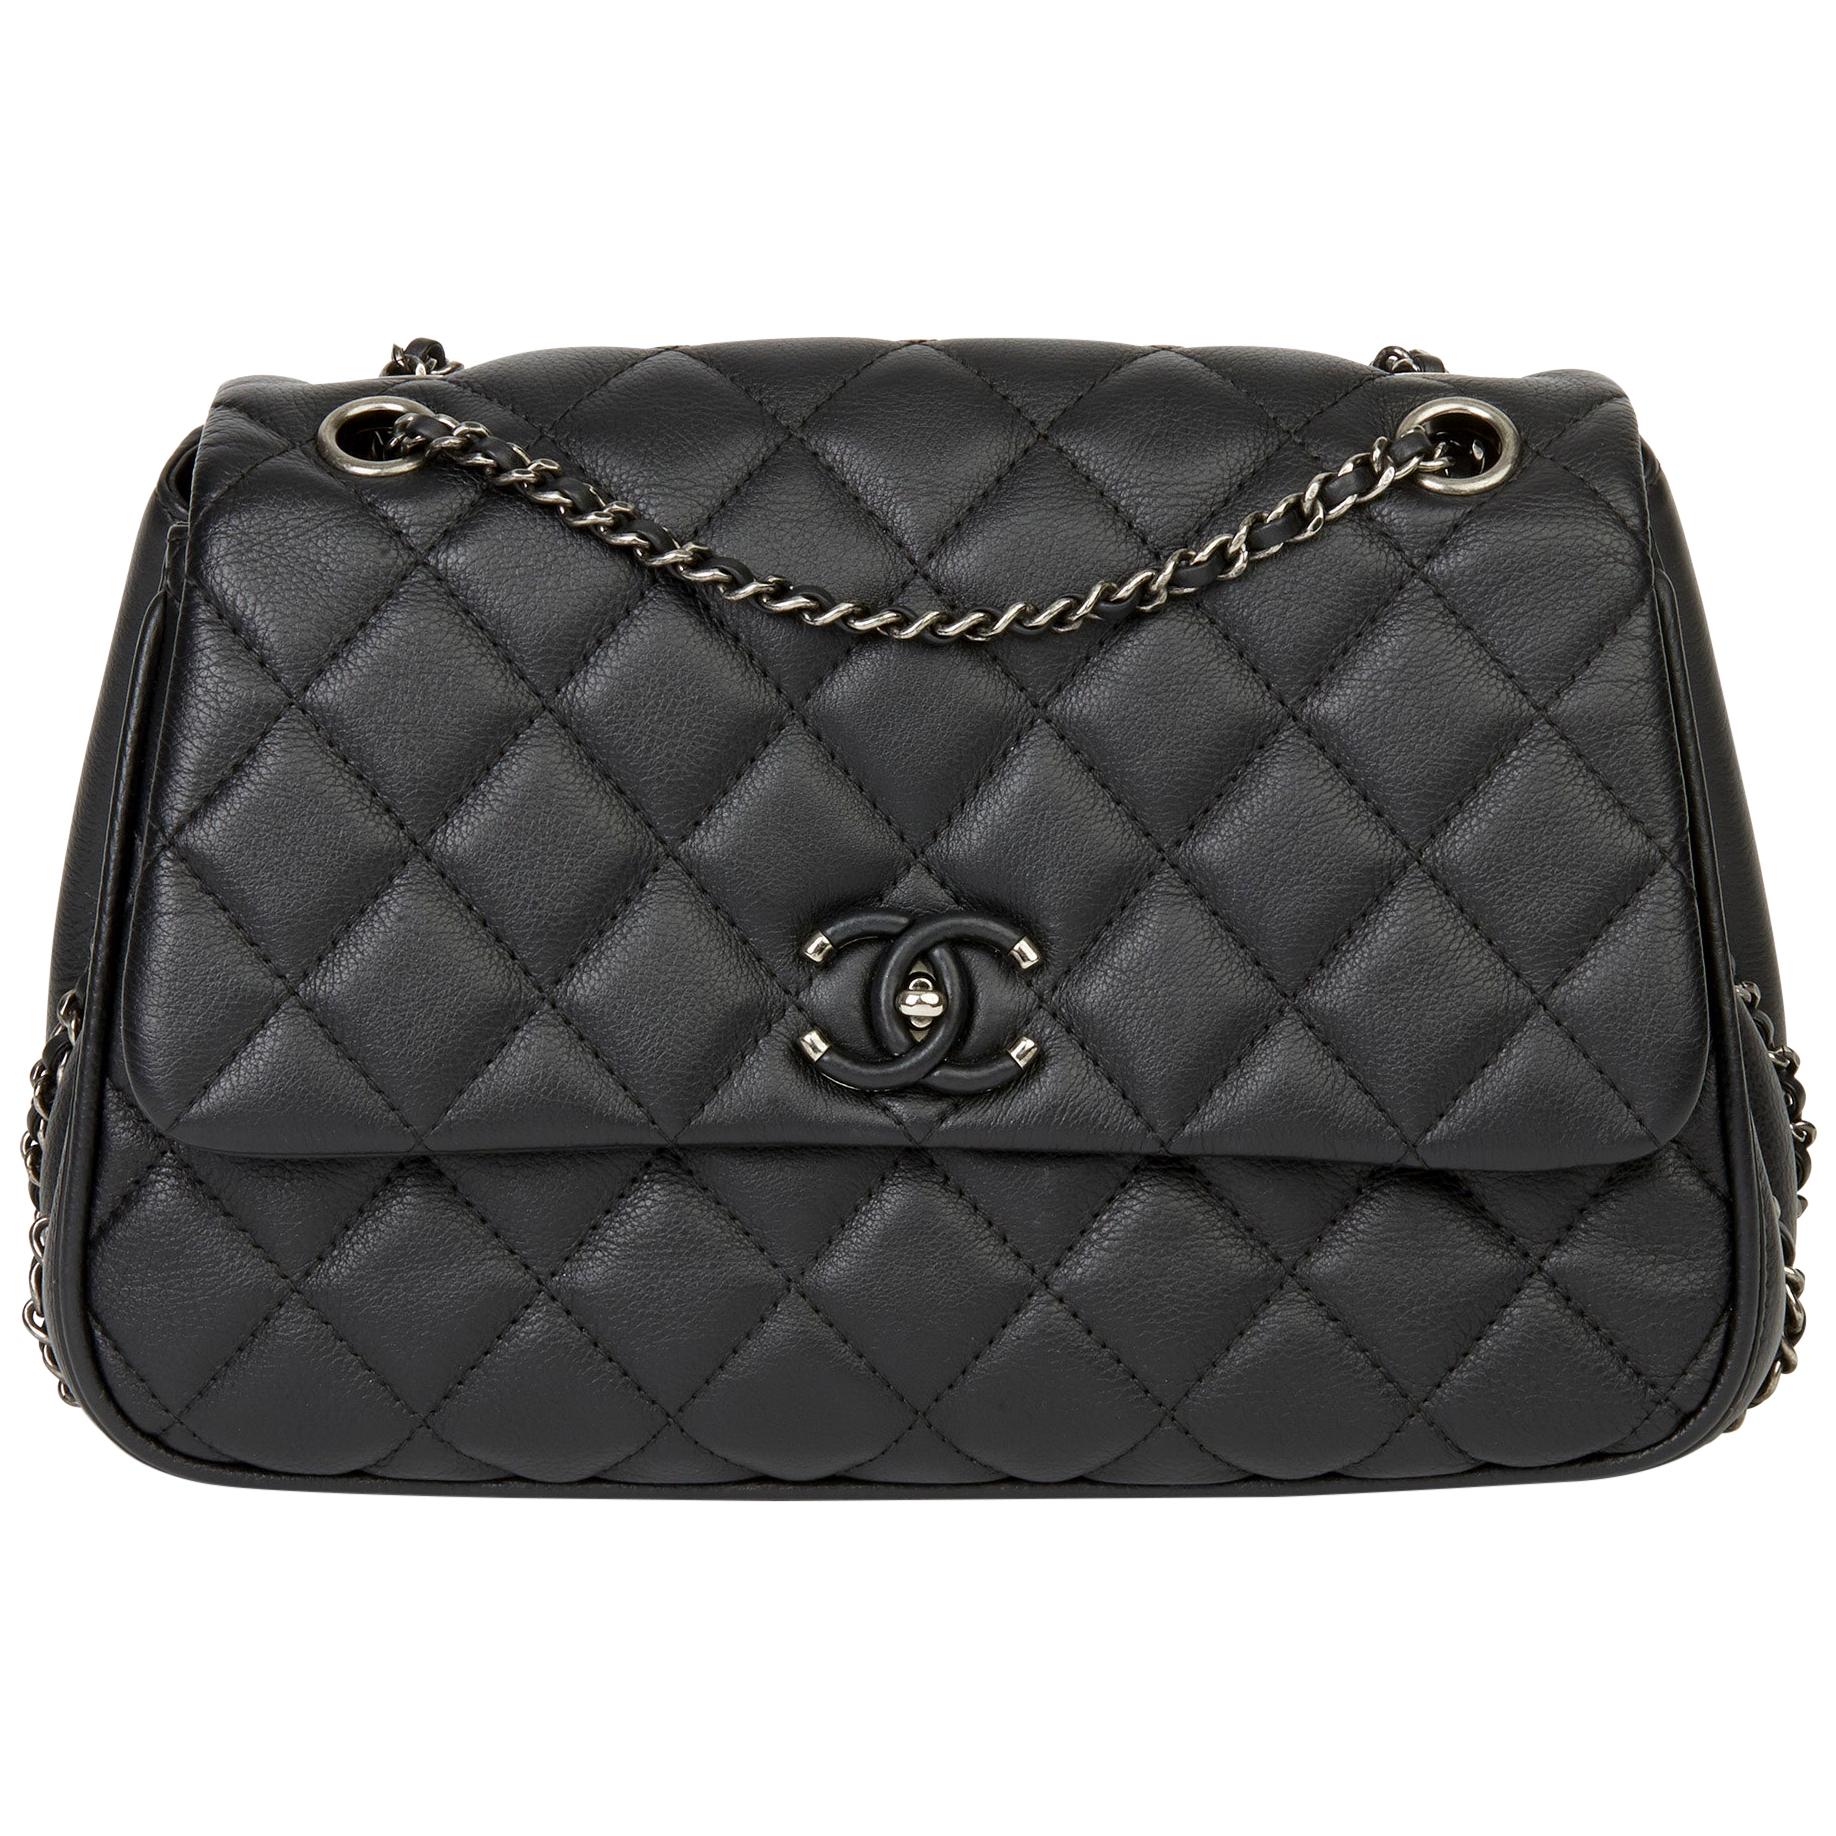 2017 Chanel Black Quilted Calfskin Leather Medium Frame in Chain Flap Bag